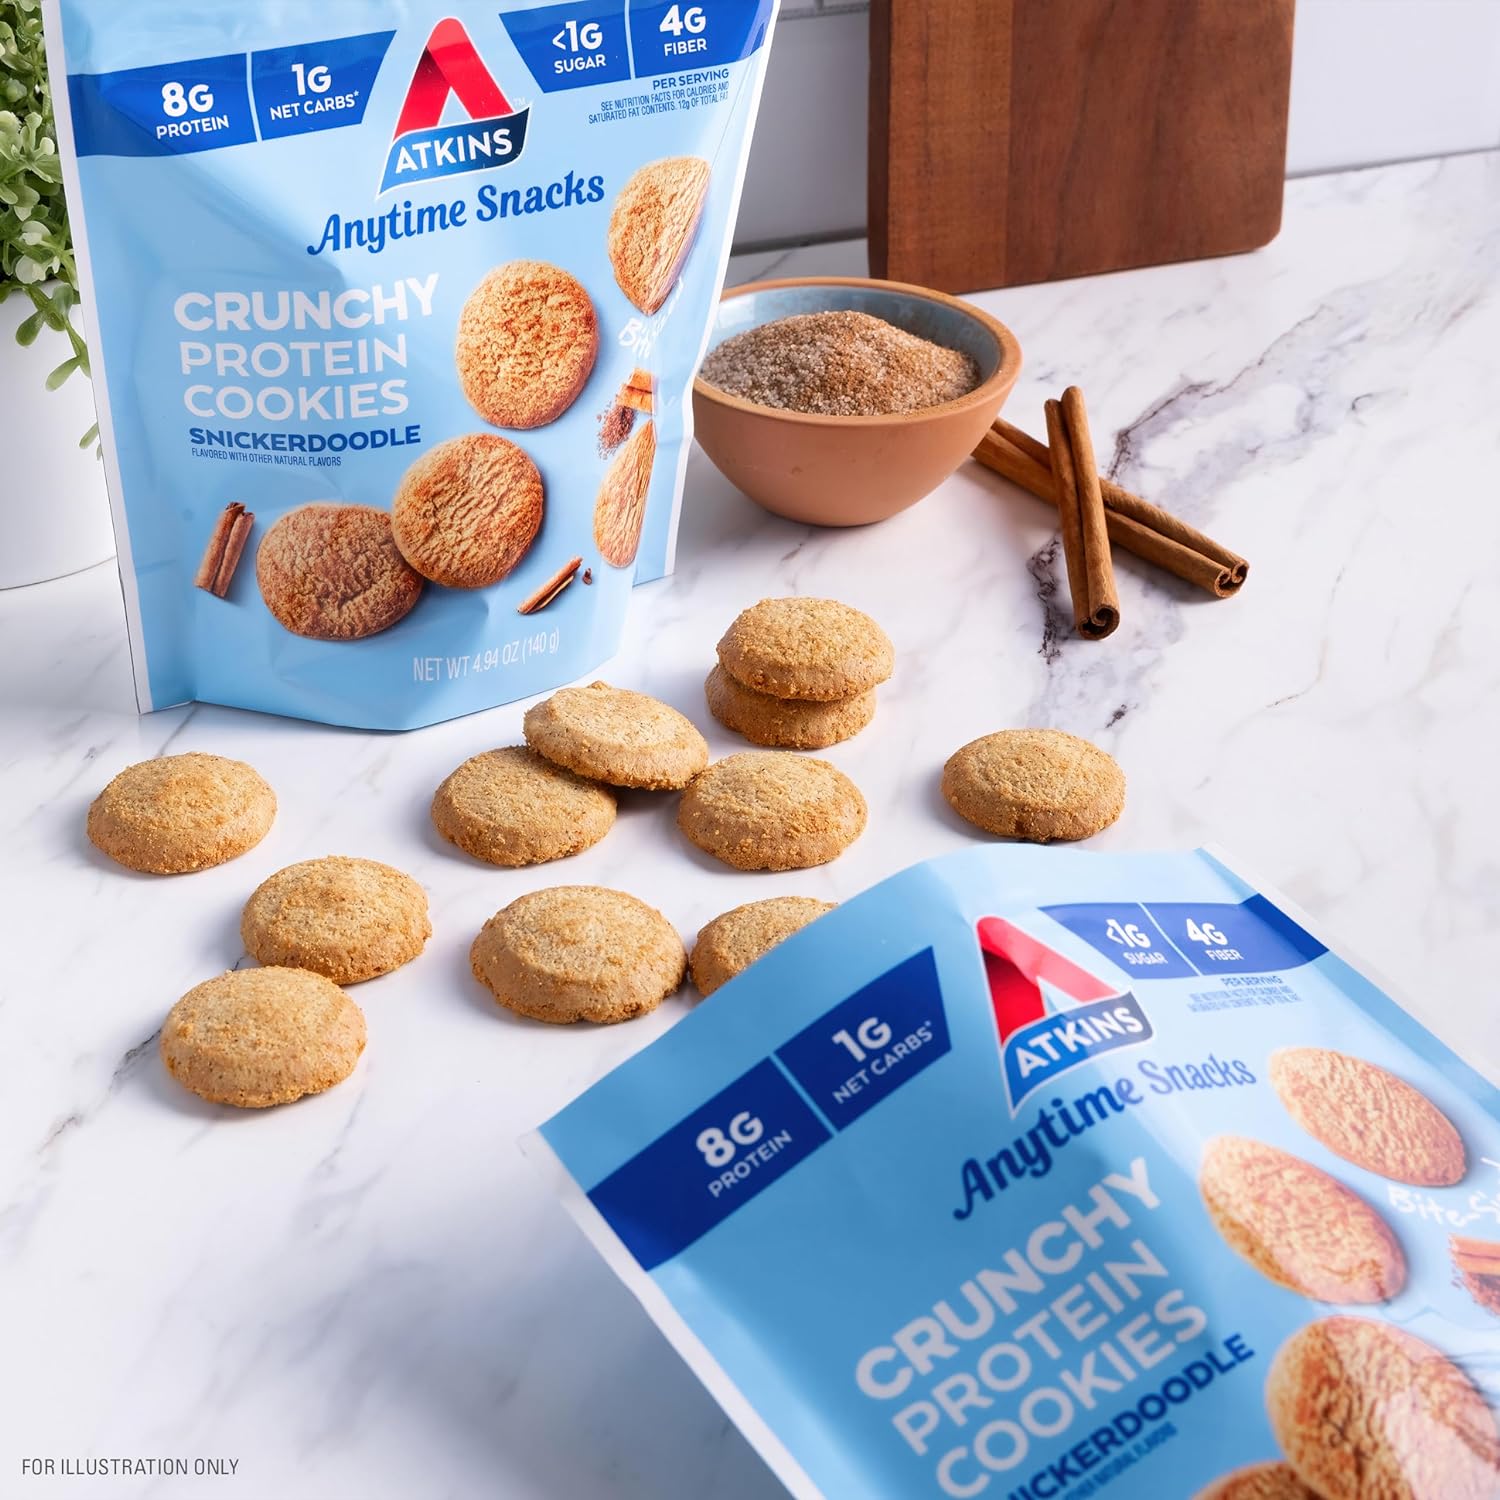 Atkins Bite-Sized Crunchy Protein Cookies, Snickerdoodle, 8g Protein, 4g Fiber, 1g Net Carb, 1g Sugar, Keto Friendly, 3 Bags (5 Servings Per Bag) : Everything Else